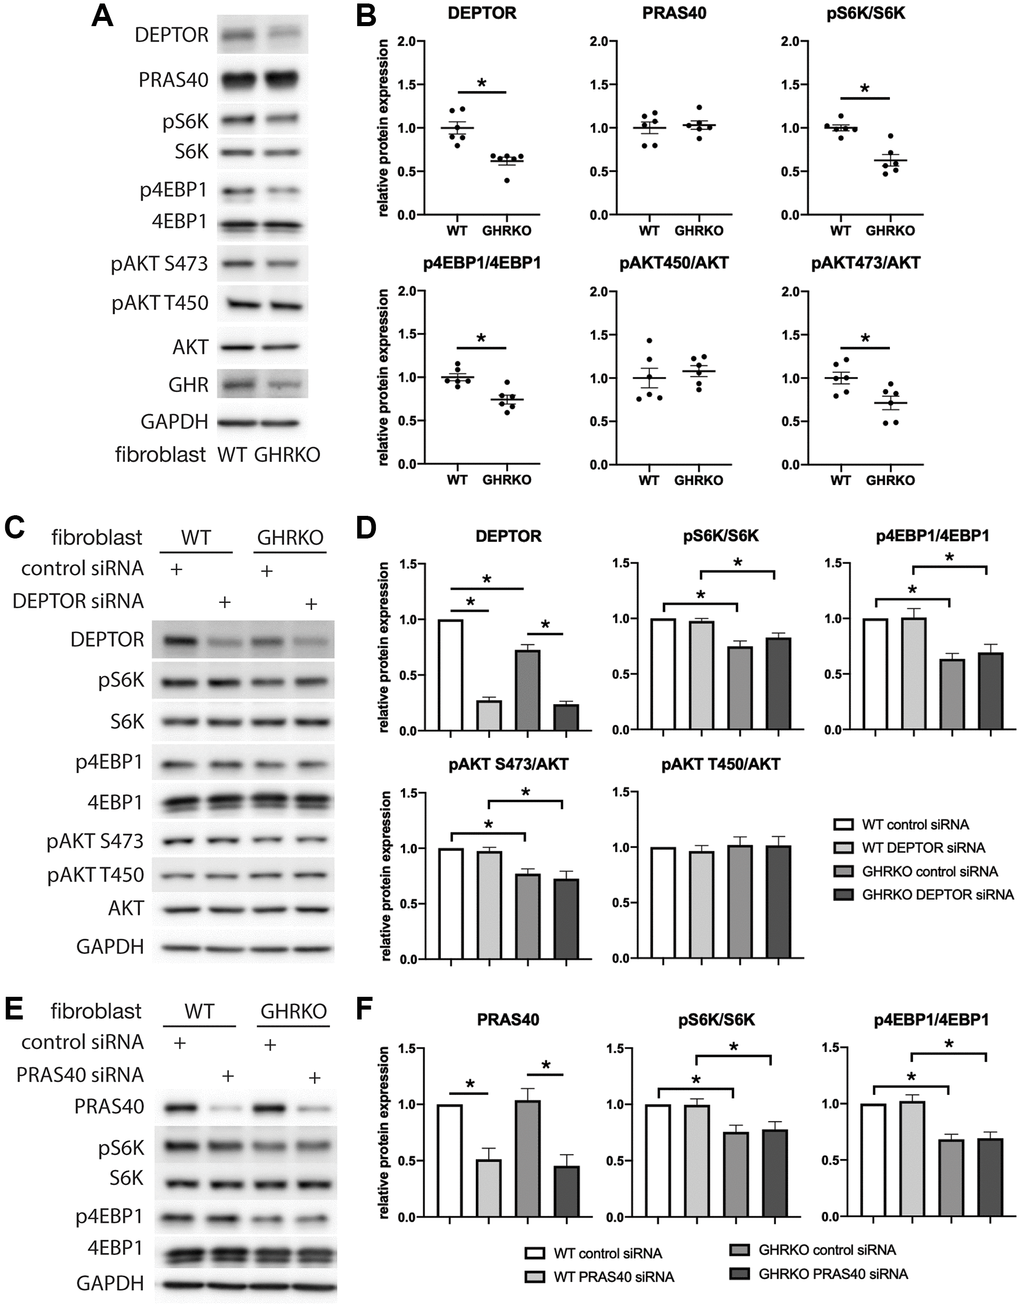 mTORC1 or mTORC2 substrates are not regulated by DEPTOR or PRAS40 knockdown in GHRKO cells. (A) Representative immunoblots of the protein expression in GHRKO cells. (B) Quantification of the protein levels in a series of experiment as in (A). (C, D) Protein expression of mTORC1 and mTORC2 substrates in DEPTOR knockdown cells. (E, F) Protein expression of mTORC1 substrates in PRAS40 knockdown cells. N = 6. (*) for t-test p 